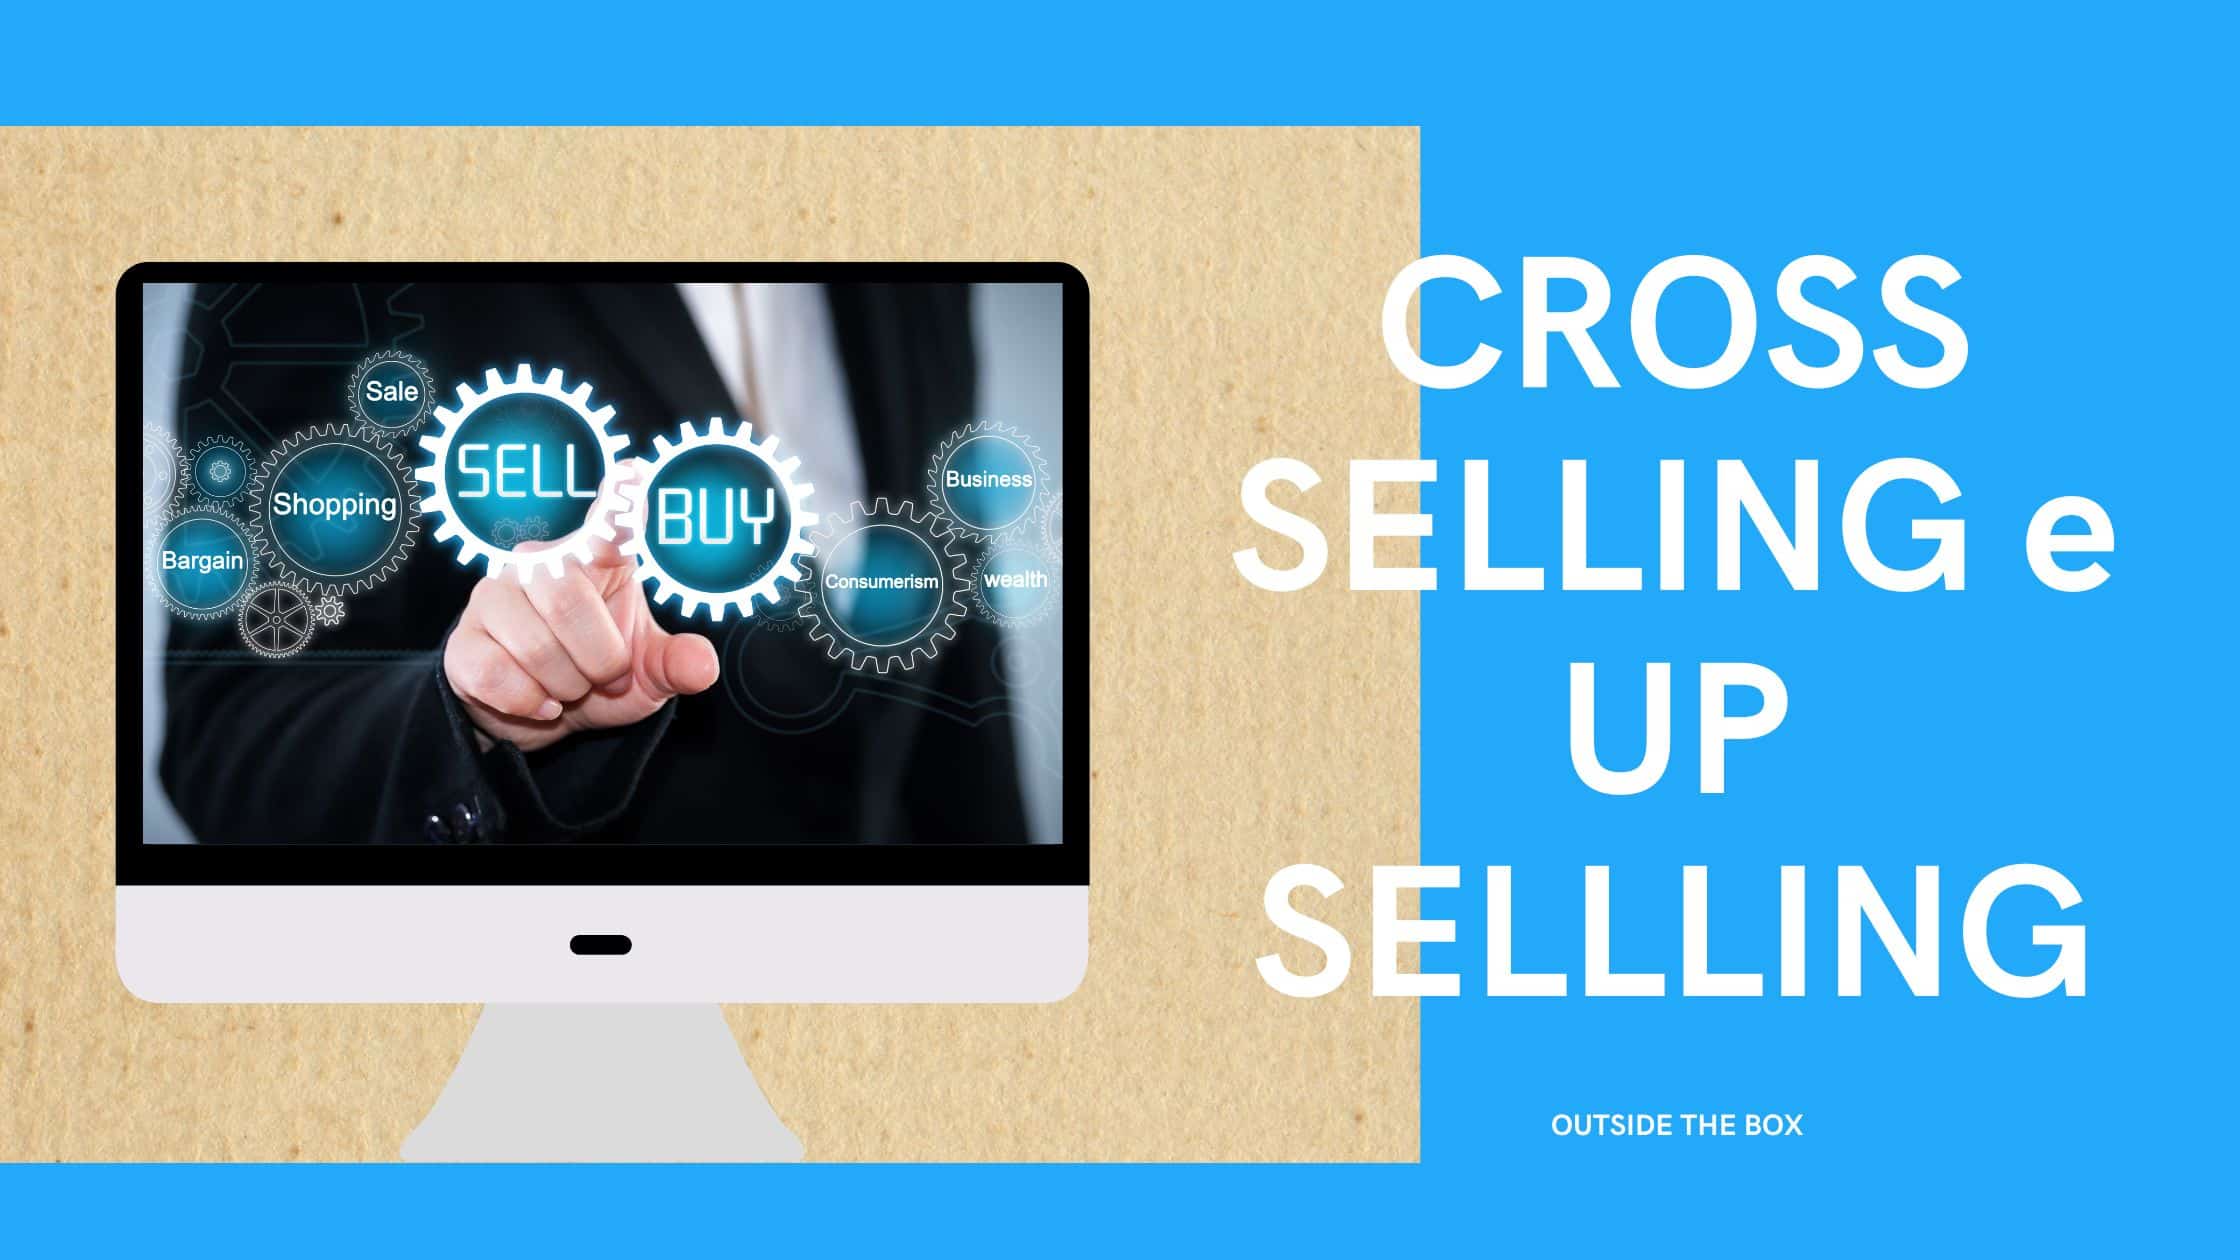 Cross selling e Up selling